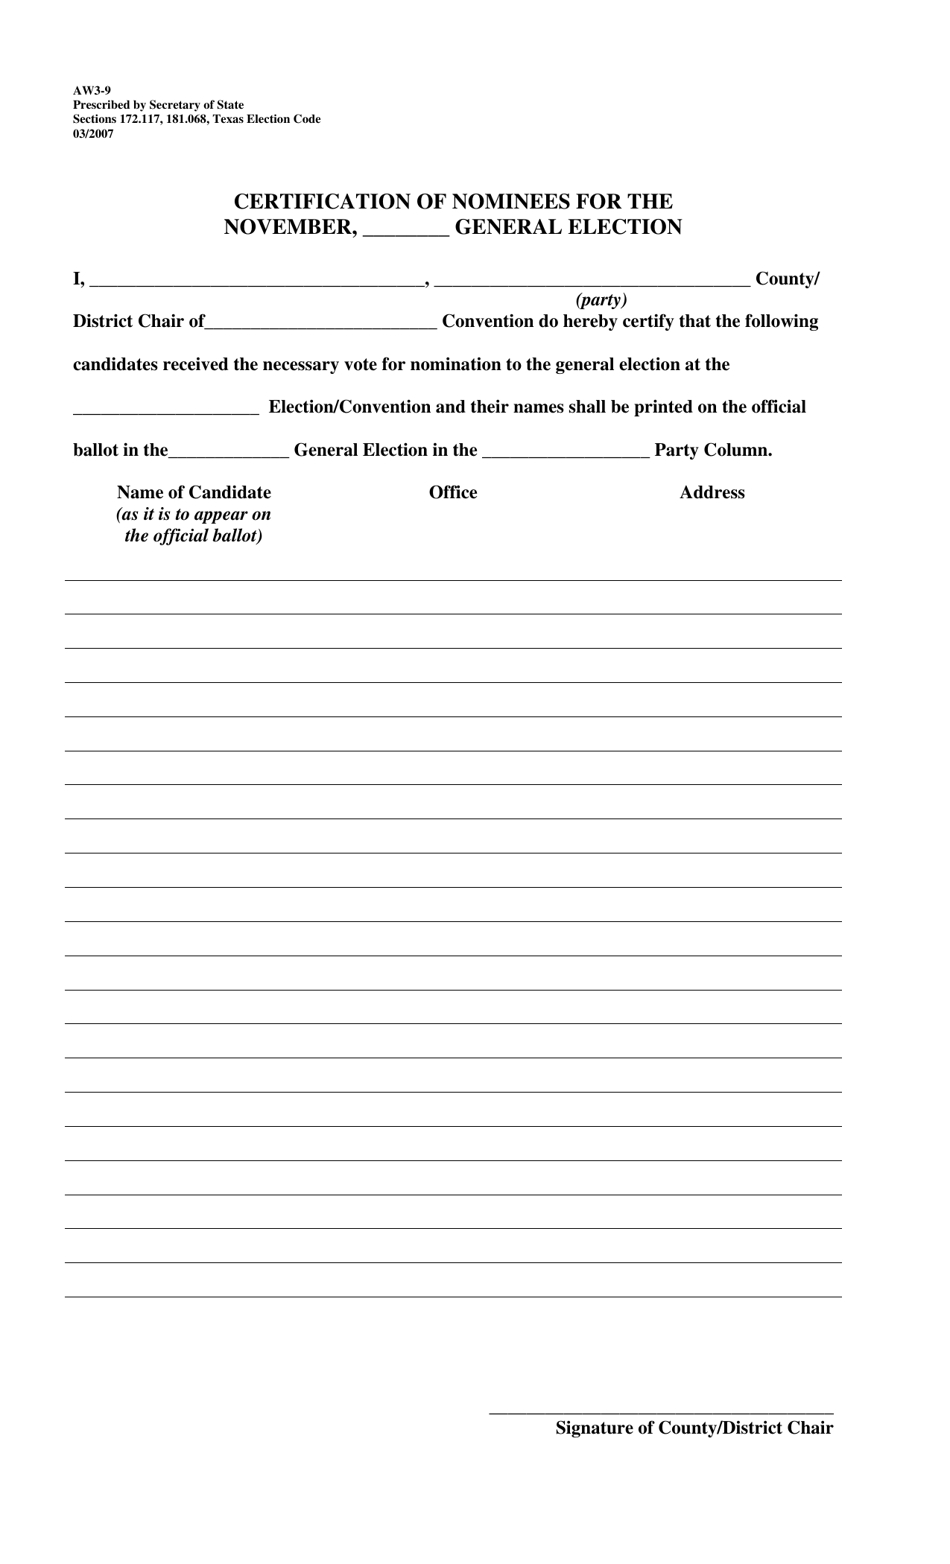 Form AW3-9 Certification of Nominees for the November General Election - Texas, Page 1